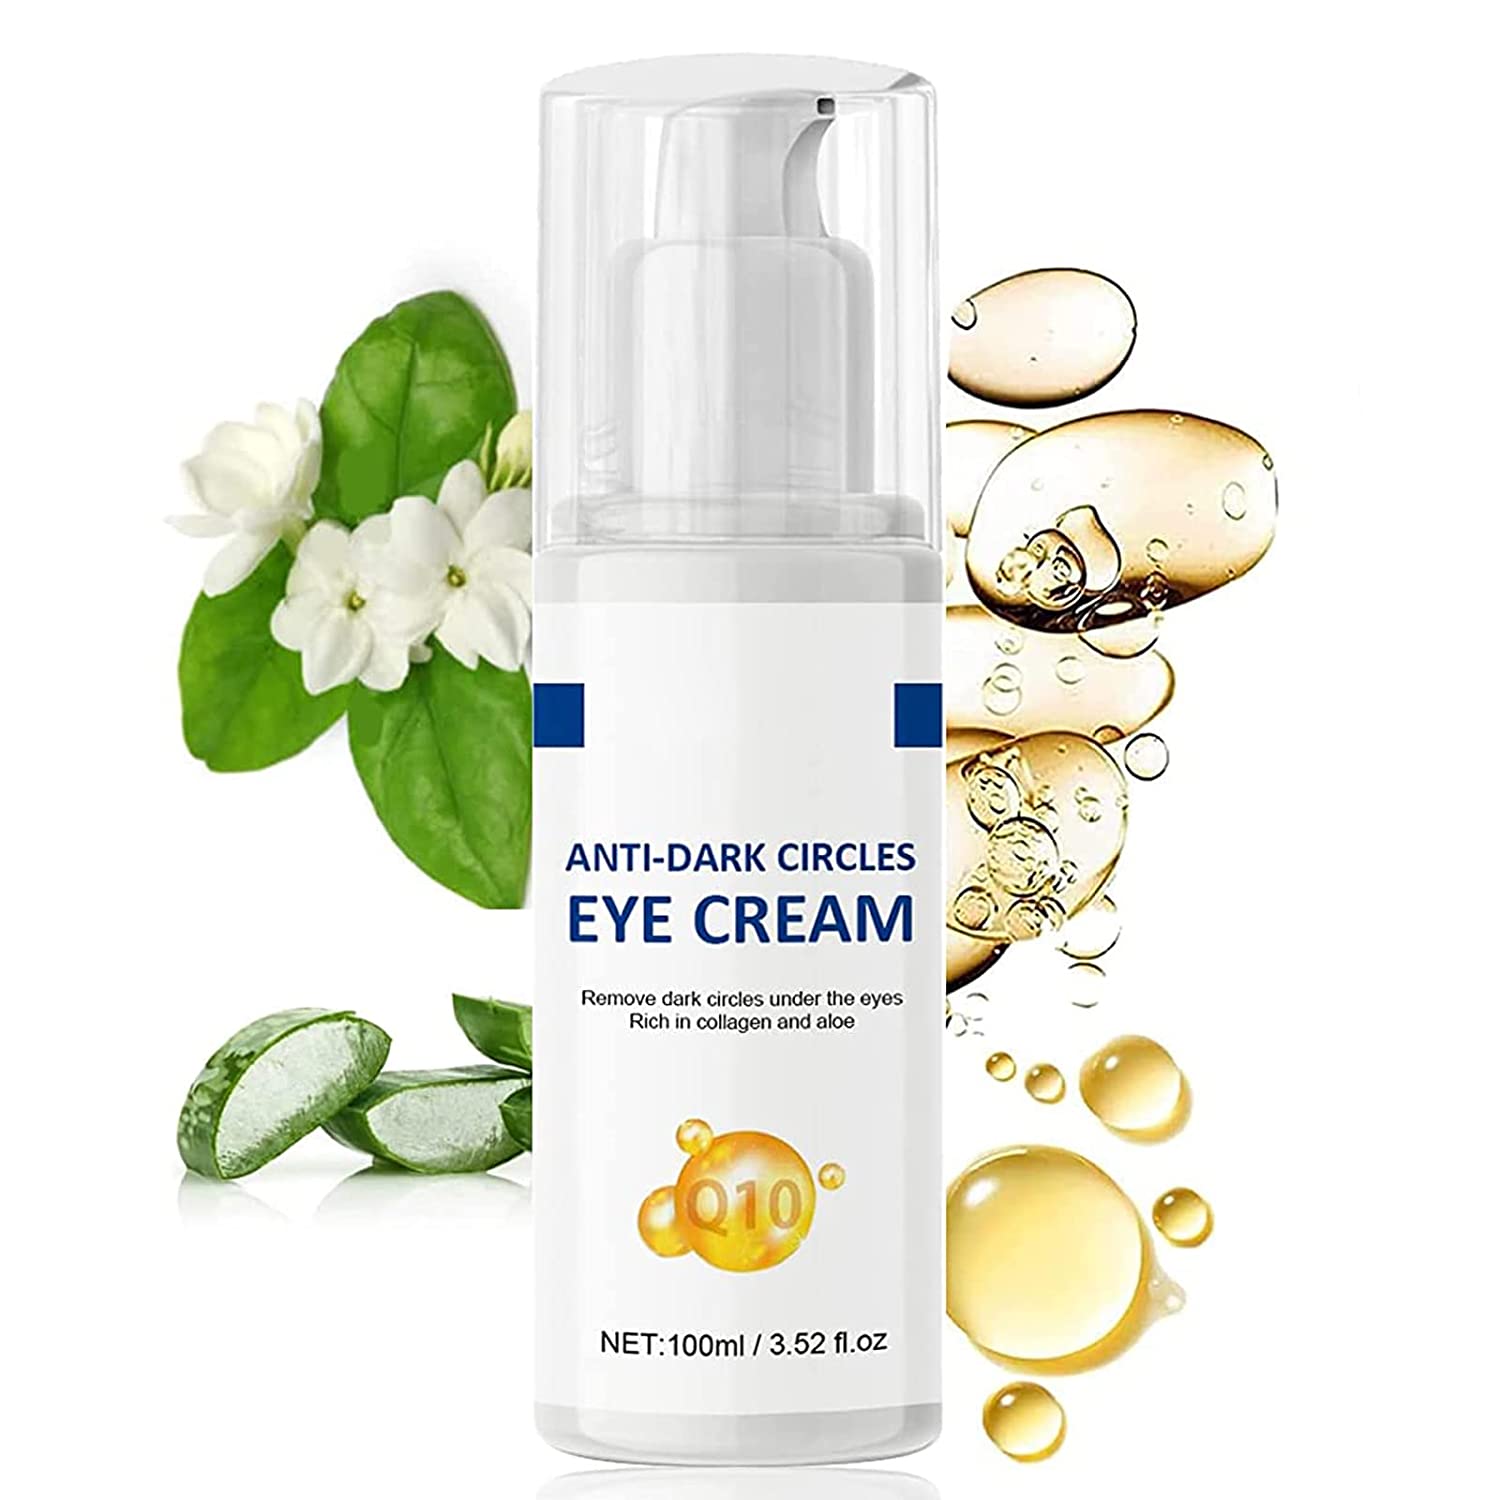 Jasmine Ointment Plus - Active Jasmine Ointment Dark Circles, Jasmine Ointment Dark Circles, Eye Cream Against Wrinkles and Dark Circles, Remove Dark Circles, Eye Cream with Collagen and Aloe Vera Each 100 ml